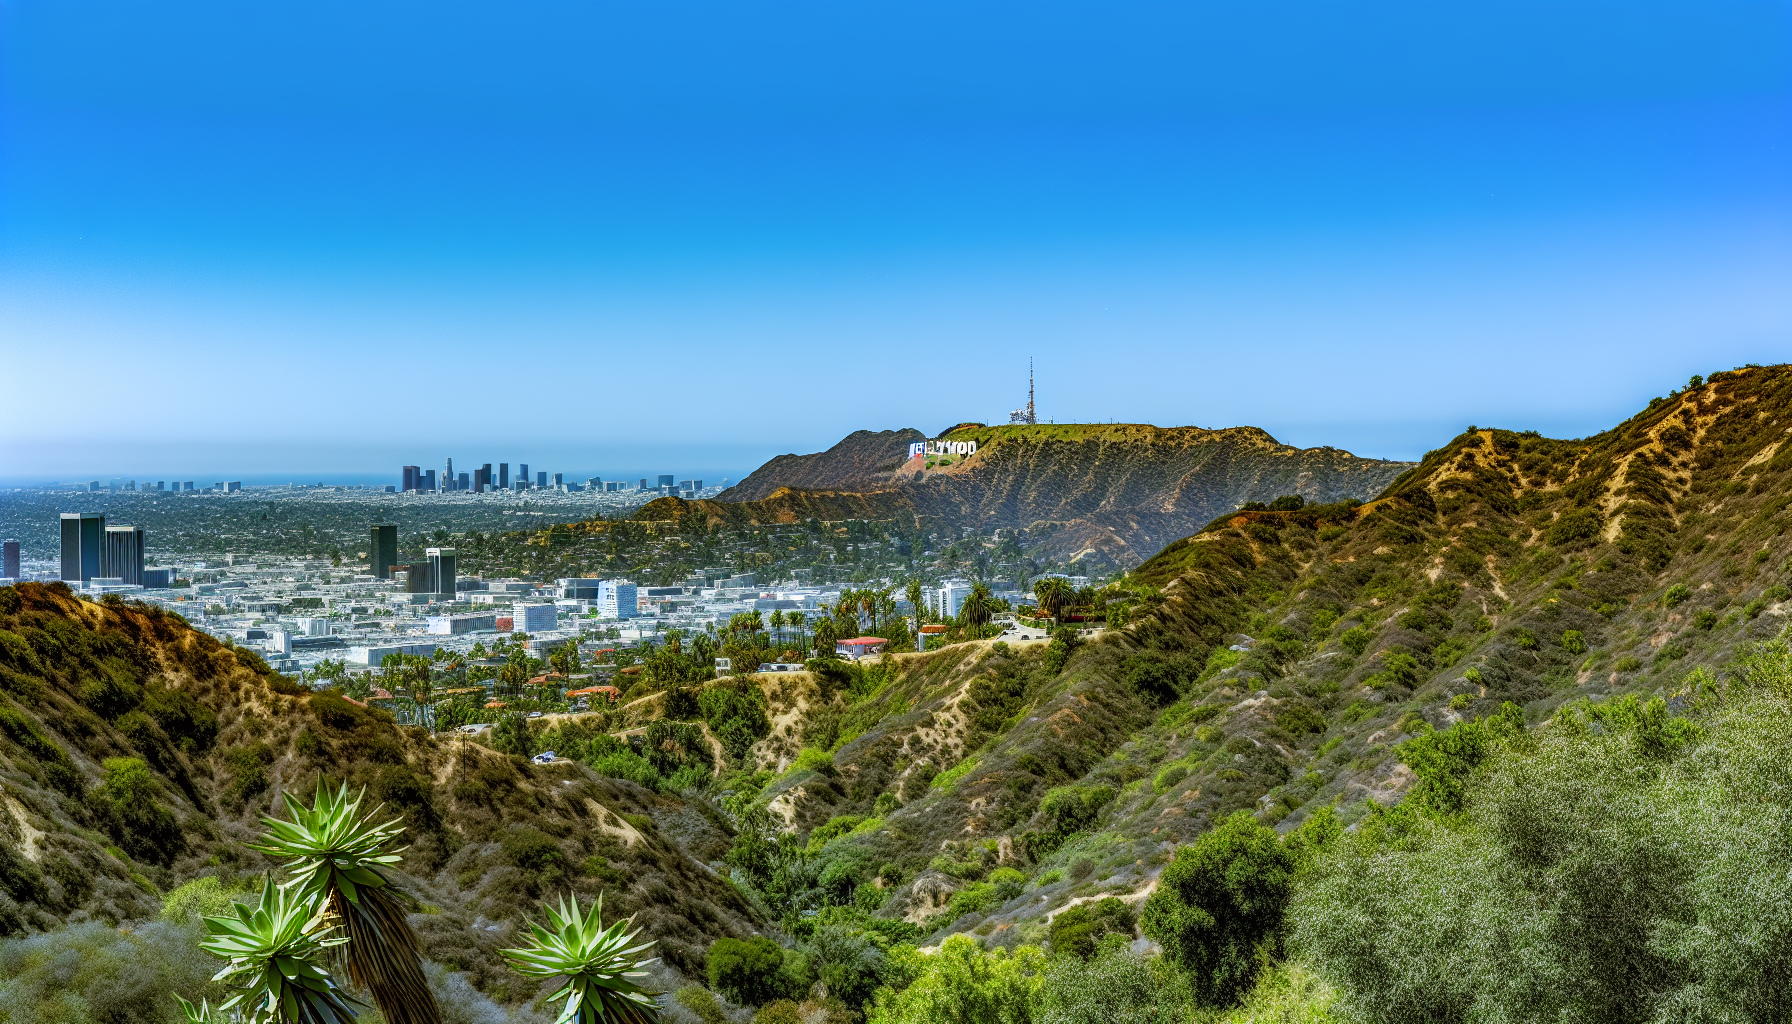 Breathtaking view of the iconic Hollywood Sign and panoramic views of Los Angeles